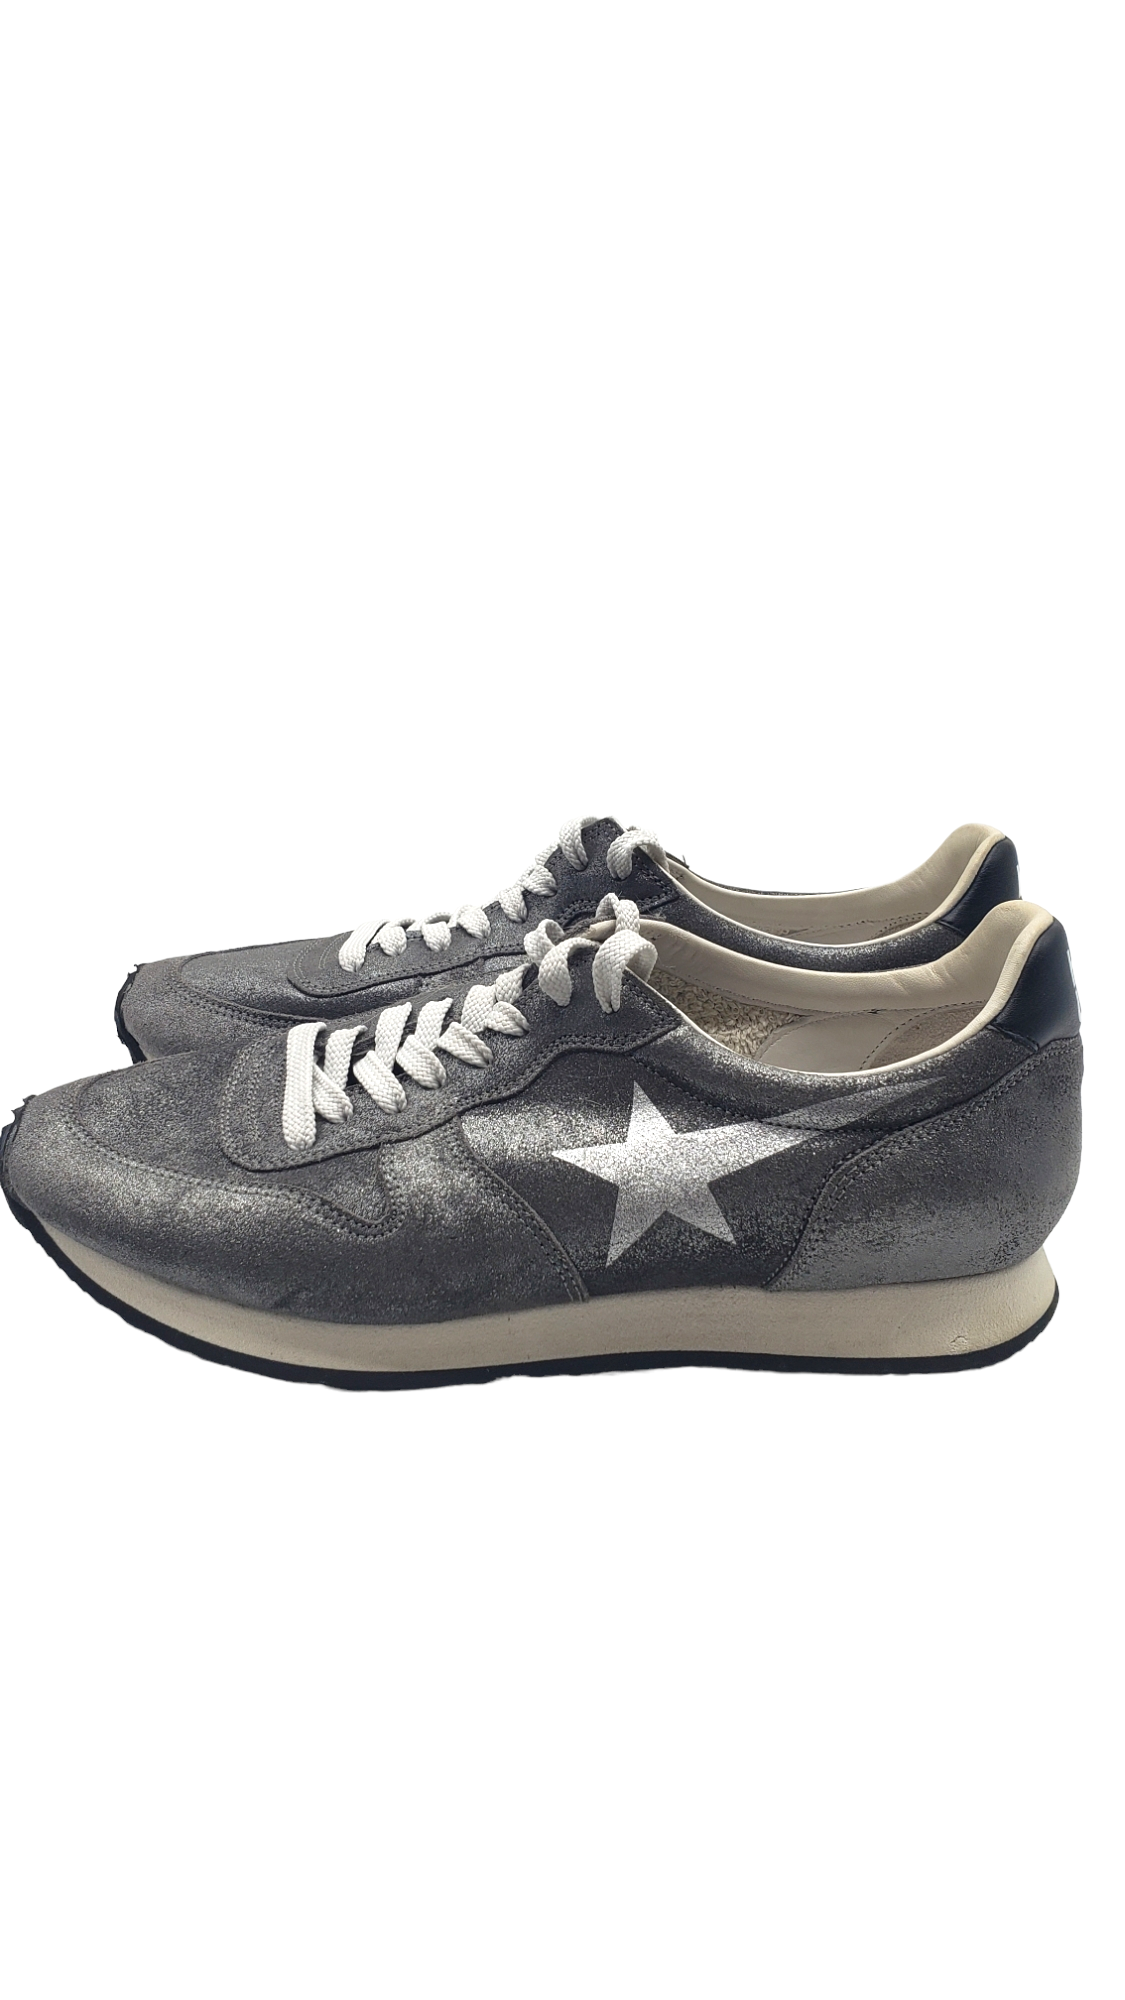 Golden Goose x Haus Silver Size 38 Sneakers